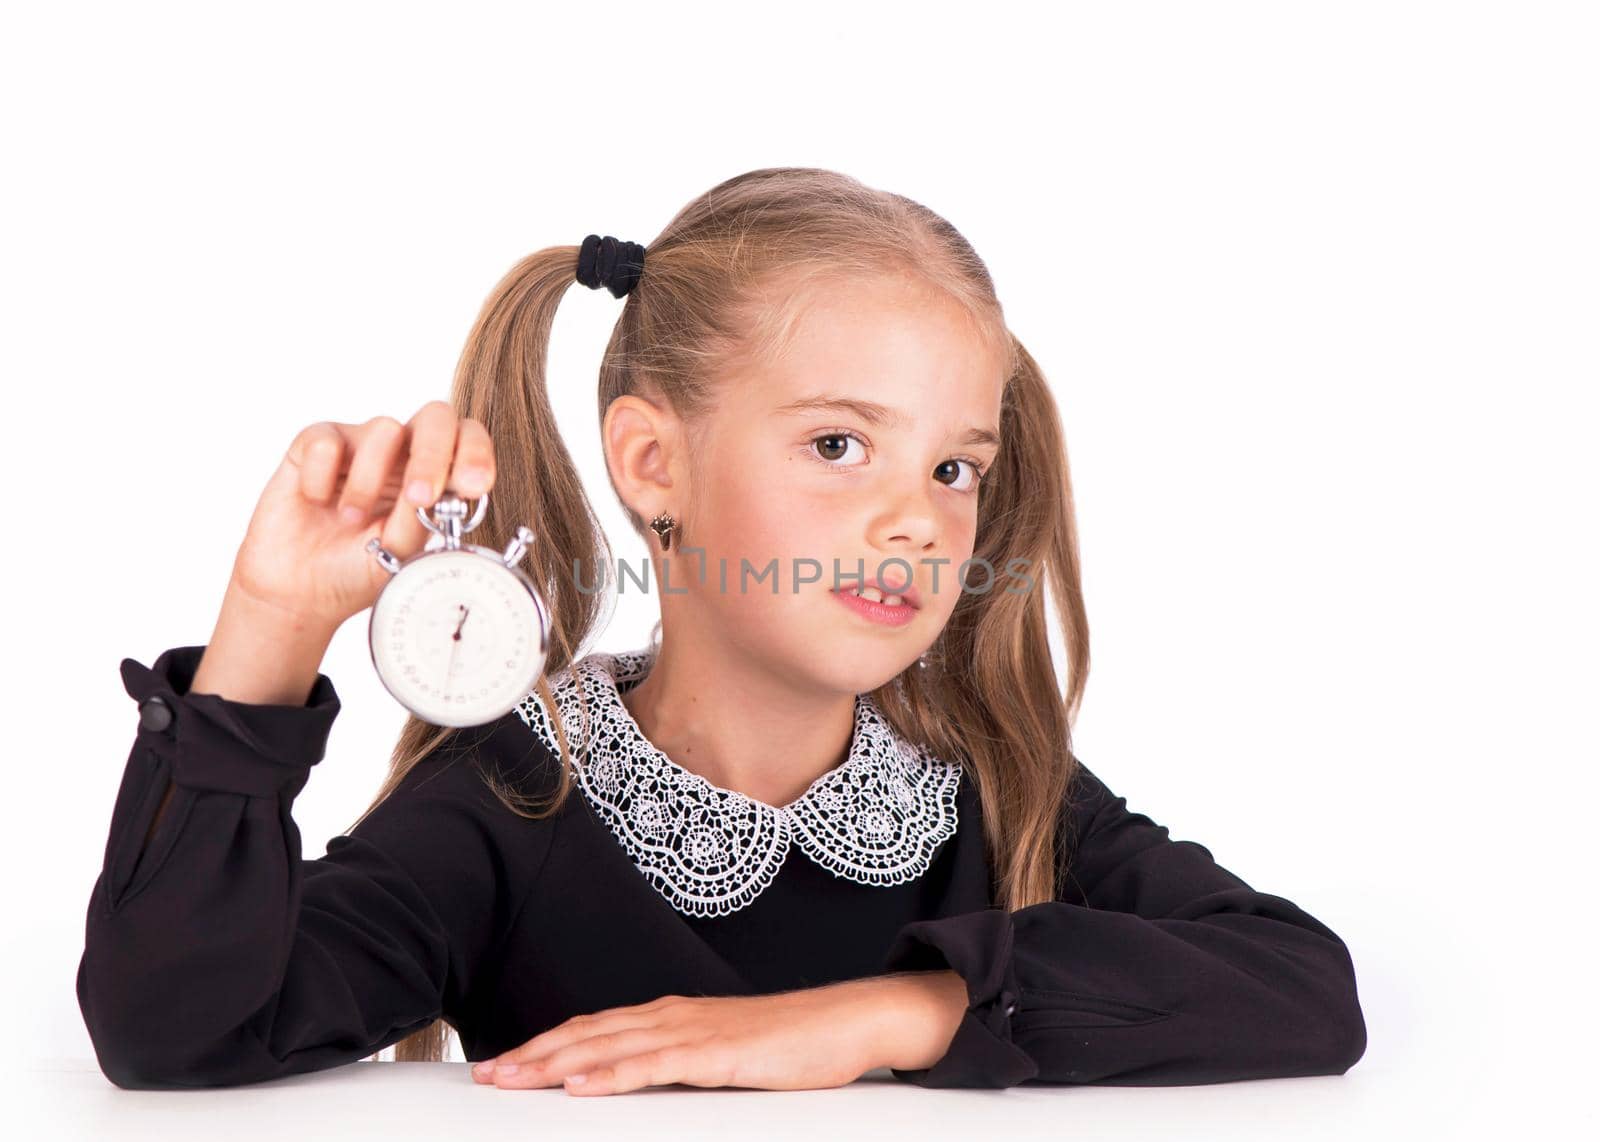 Little girl, blonde in a school dress points to a stopwatch on a white background.